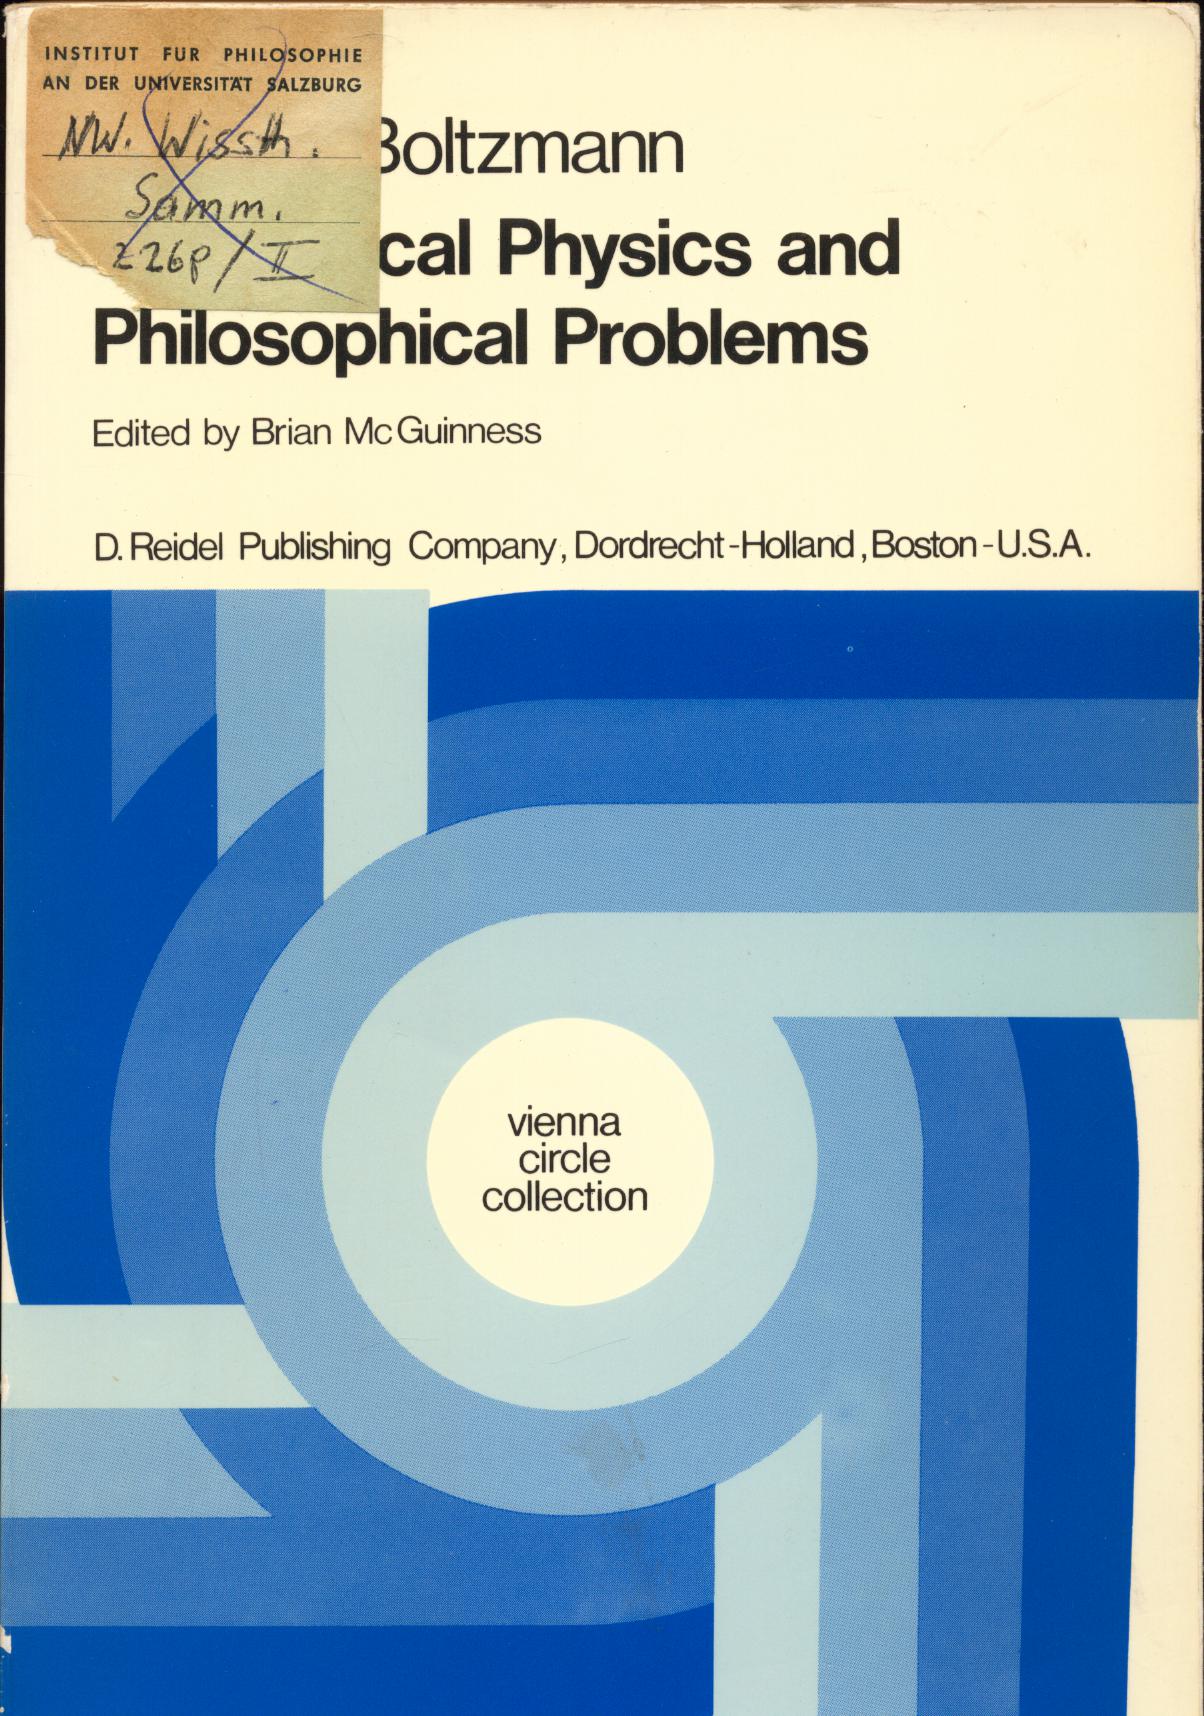 Theoretical Physics and Philosophical Problems Selected Writings 1. Auflage - Boltzmann, Ludwig und B.F. McGuinness